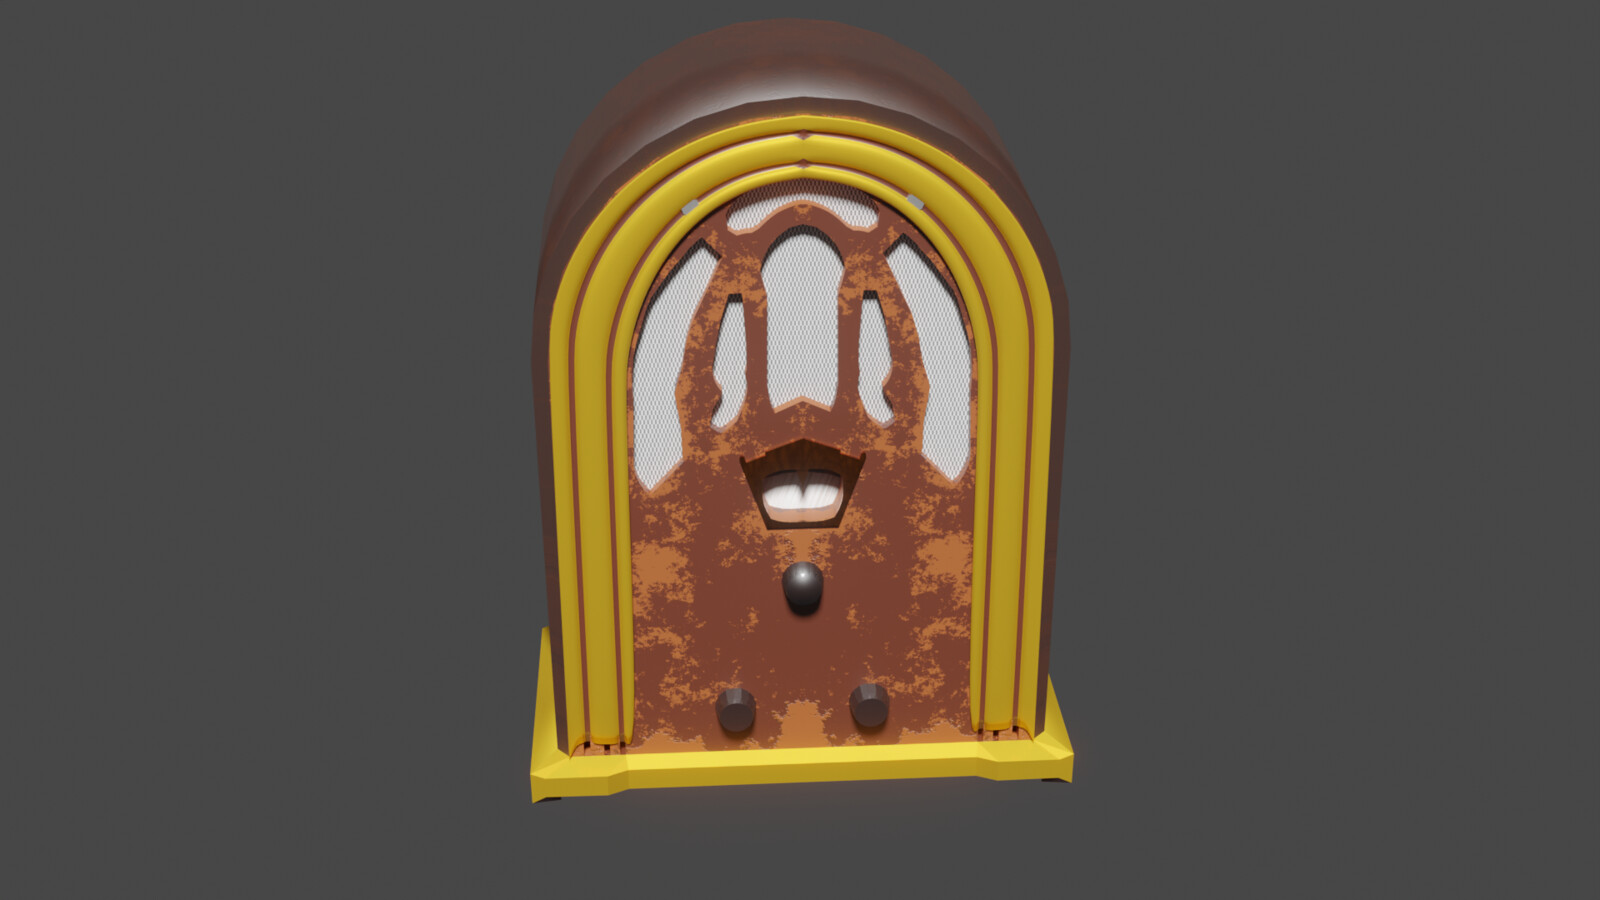 Some progress. The outer Musgrave noise felt like a bit much, so I extruded the outer edge of the radio and gave it a darker, lacquered look. There's still noise there, but it's at, at most, an eighth of the intensity.